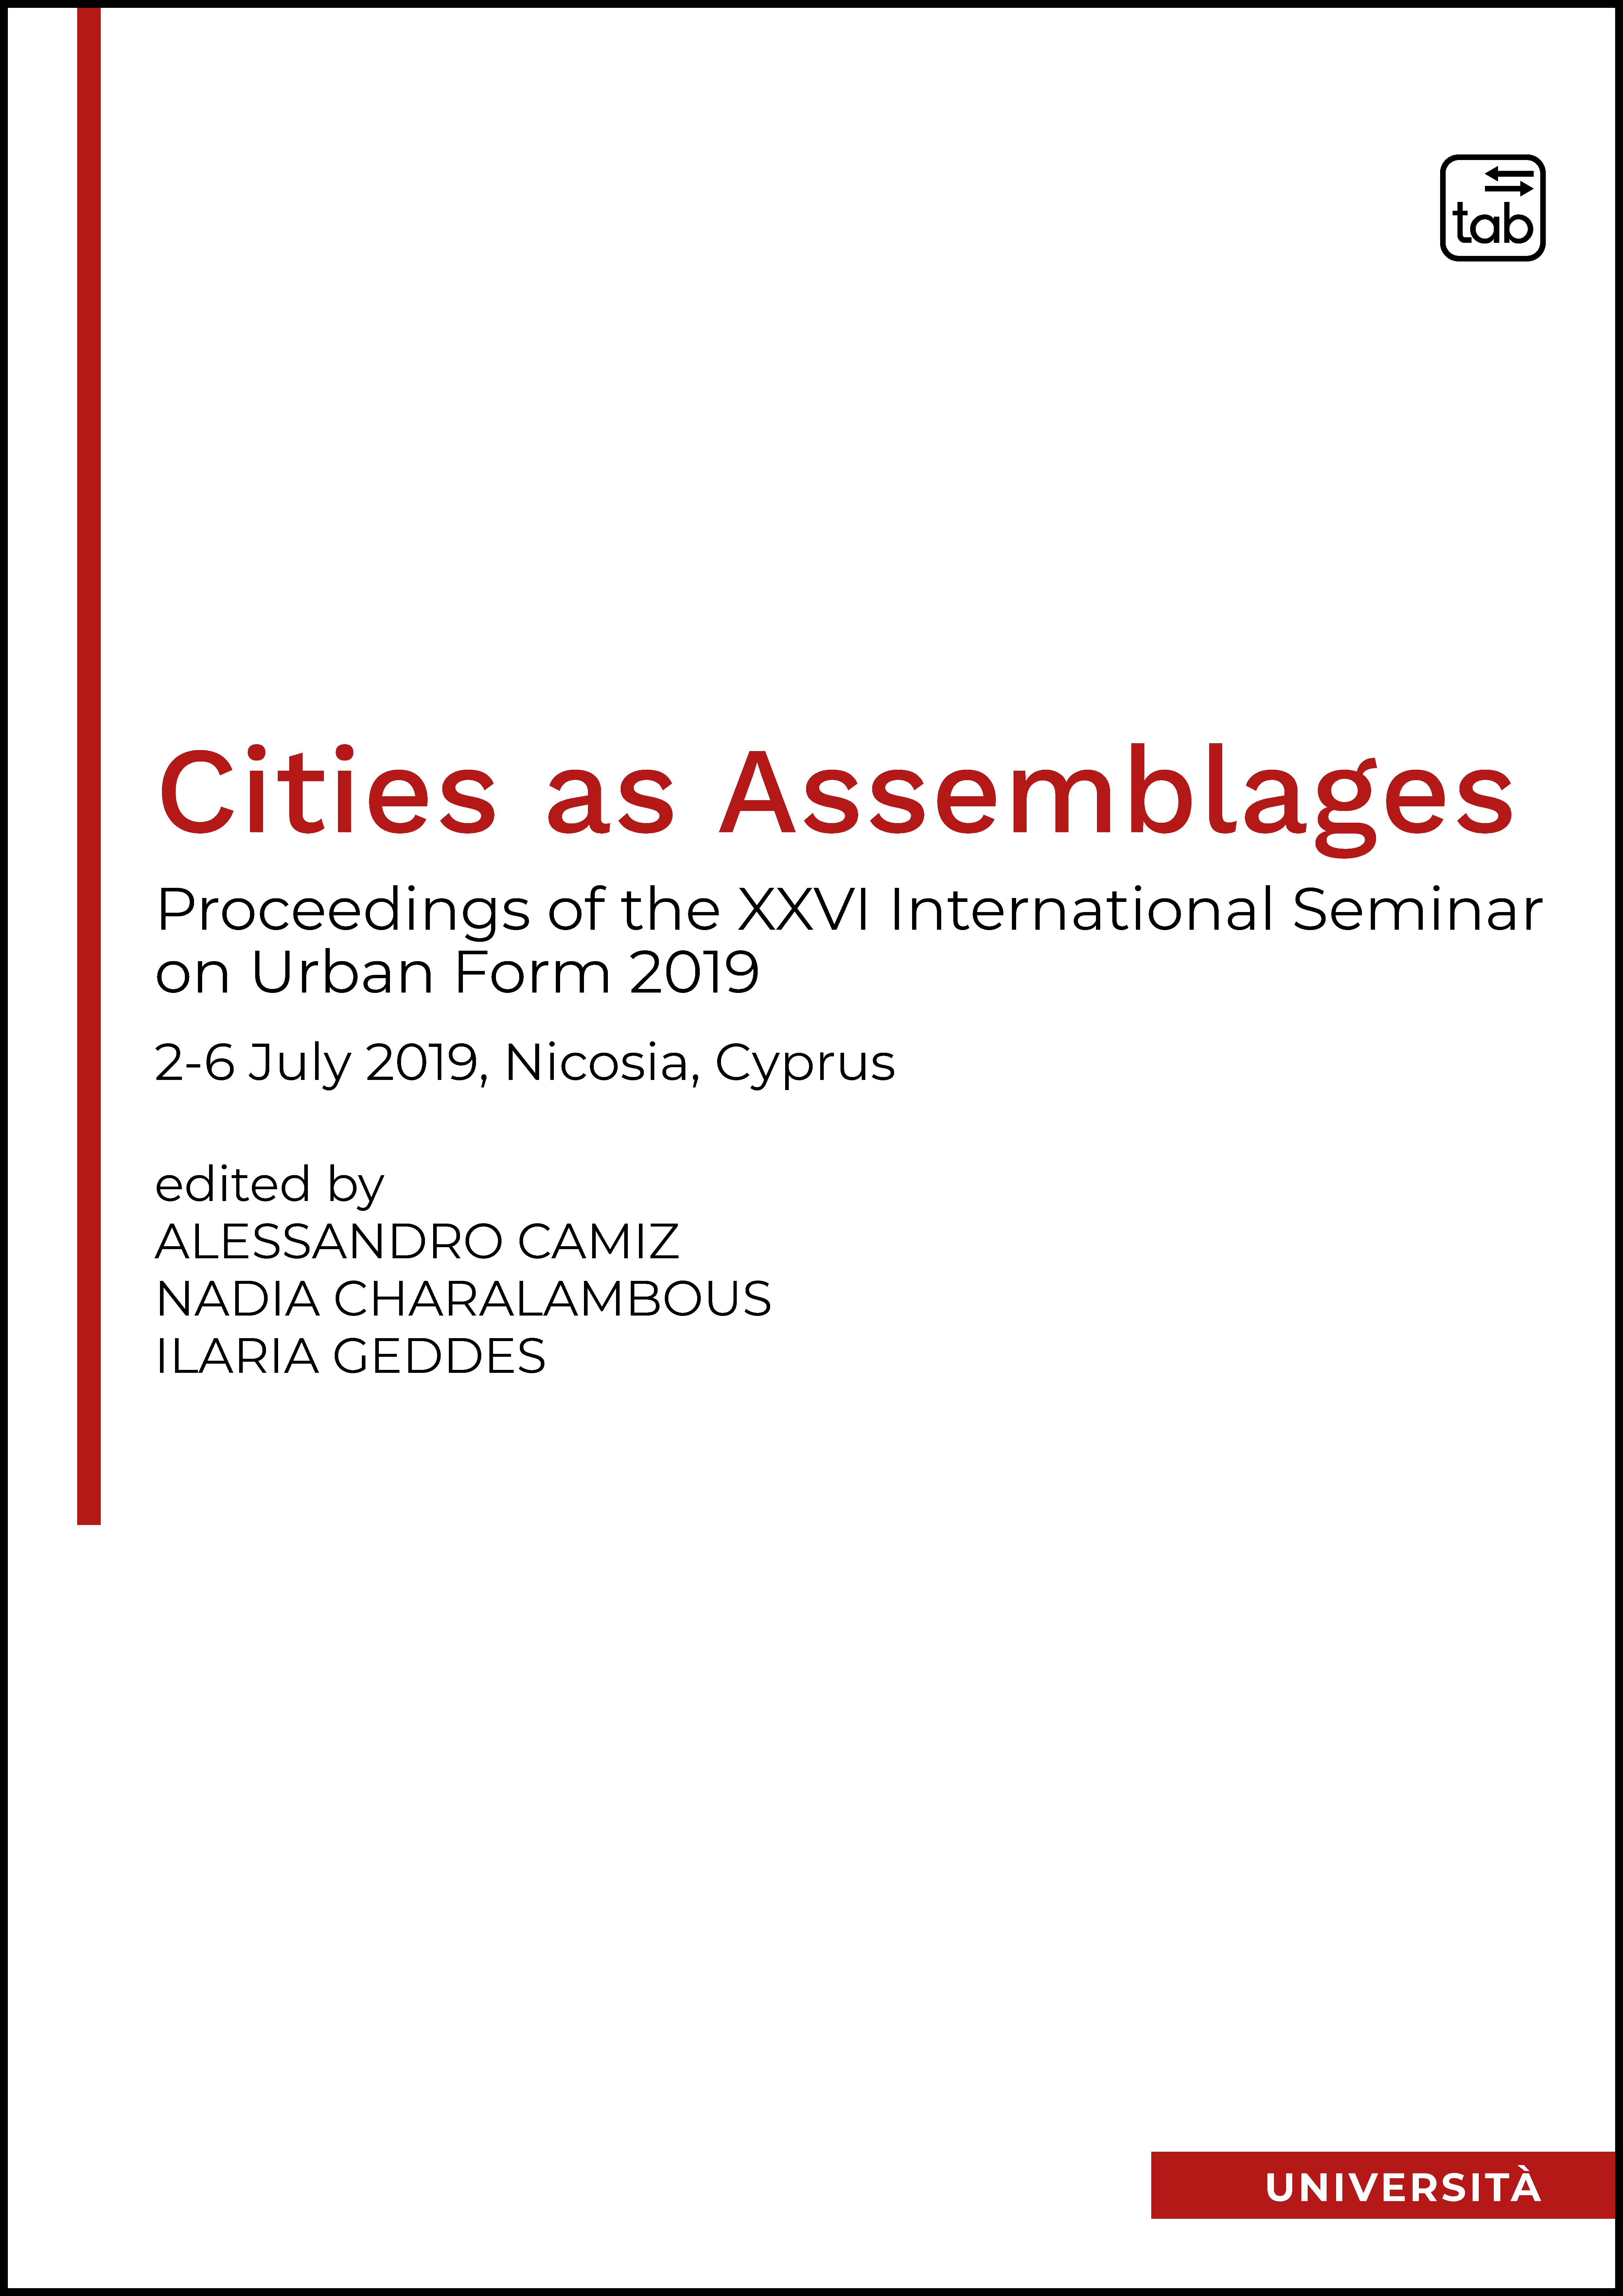 Cities as Assemblages